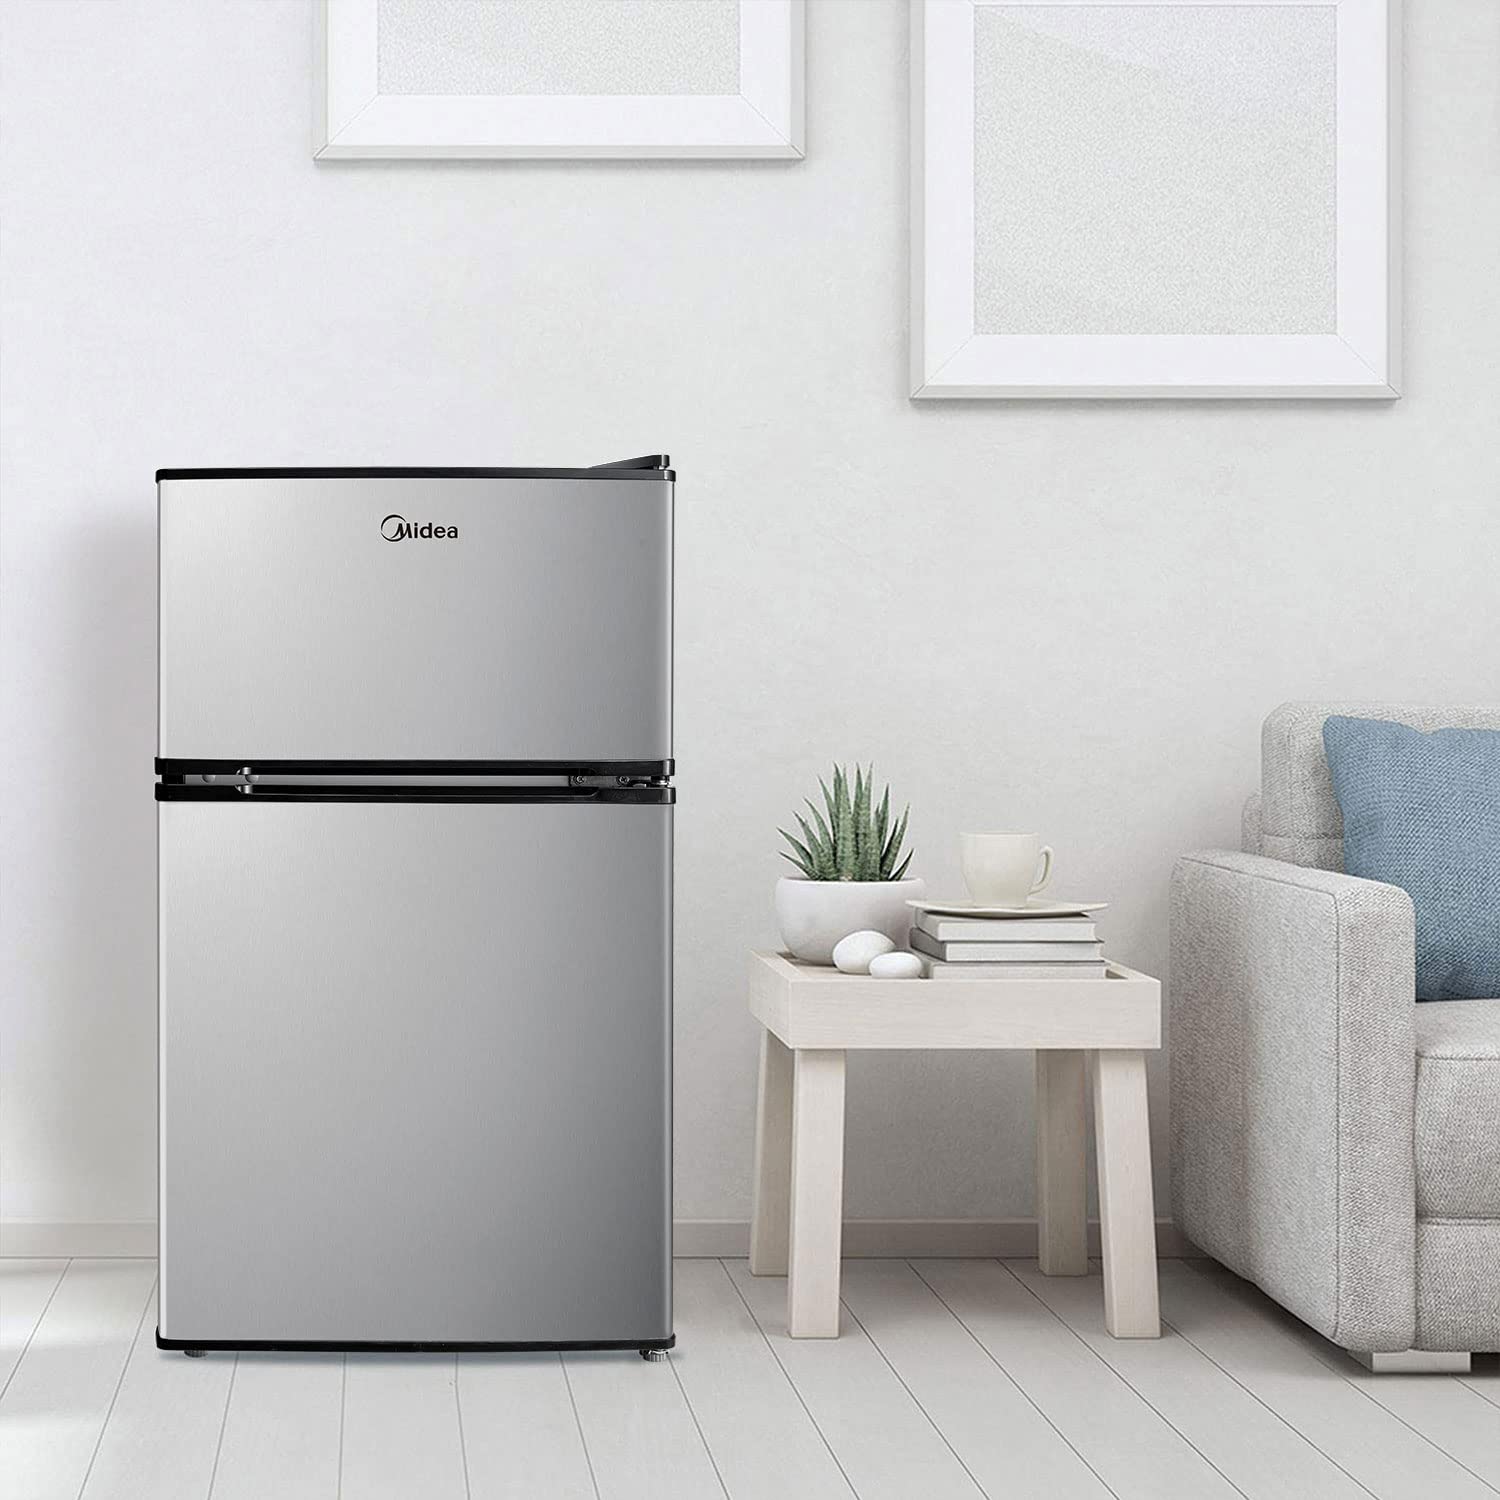 Midea WHD-113FSS1 Compact Refrigerator, 3.1 cu ft, Stainless Steel